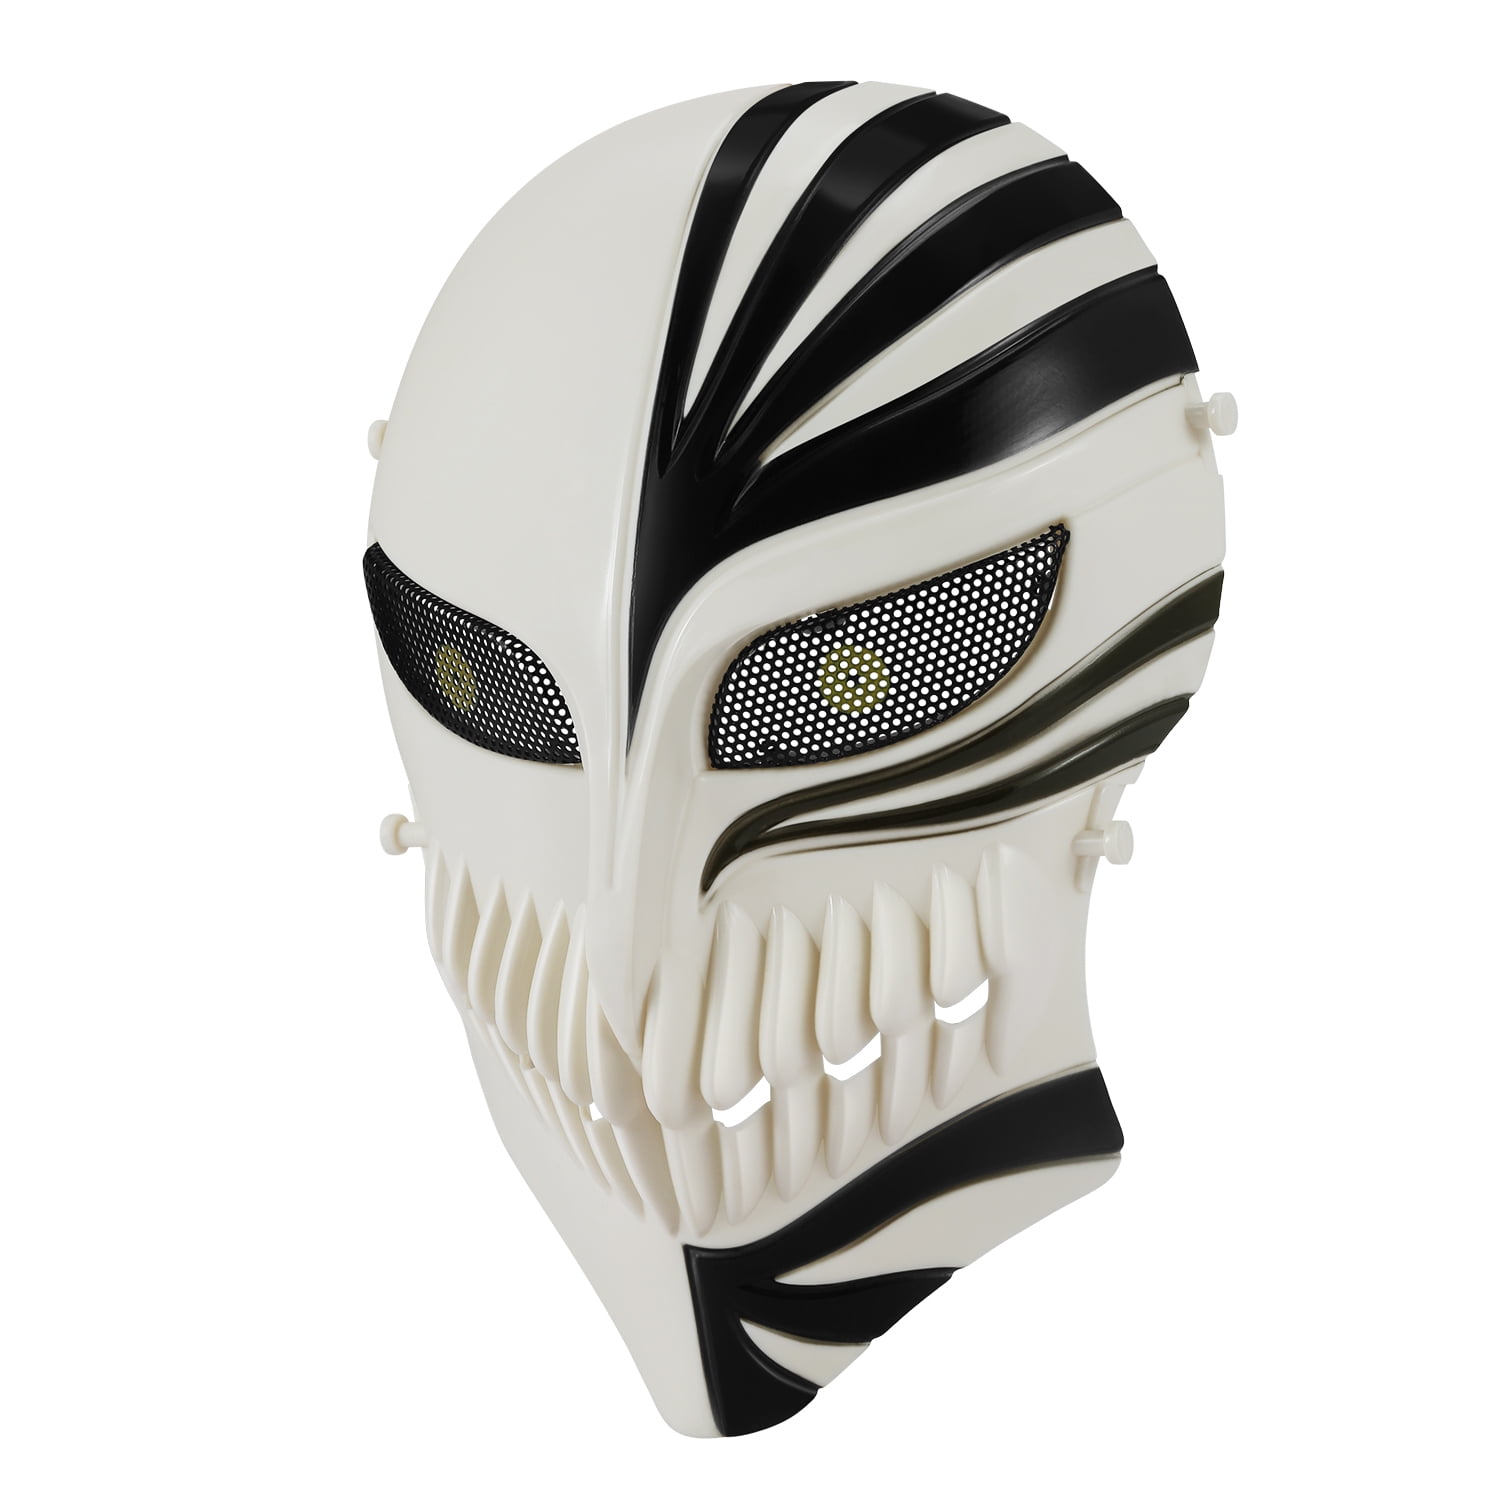 køn Ofre sædvanligt Airsoft Helmet Paintball Full Face Death Skeleton (White) Skull Mask Metal  Mesh Eye Protection Anti-fog Propane BB Field Safety Hunting Wargame Guard  /f Cosplay Halloween Outdoor Activity cool - Walmart.com